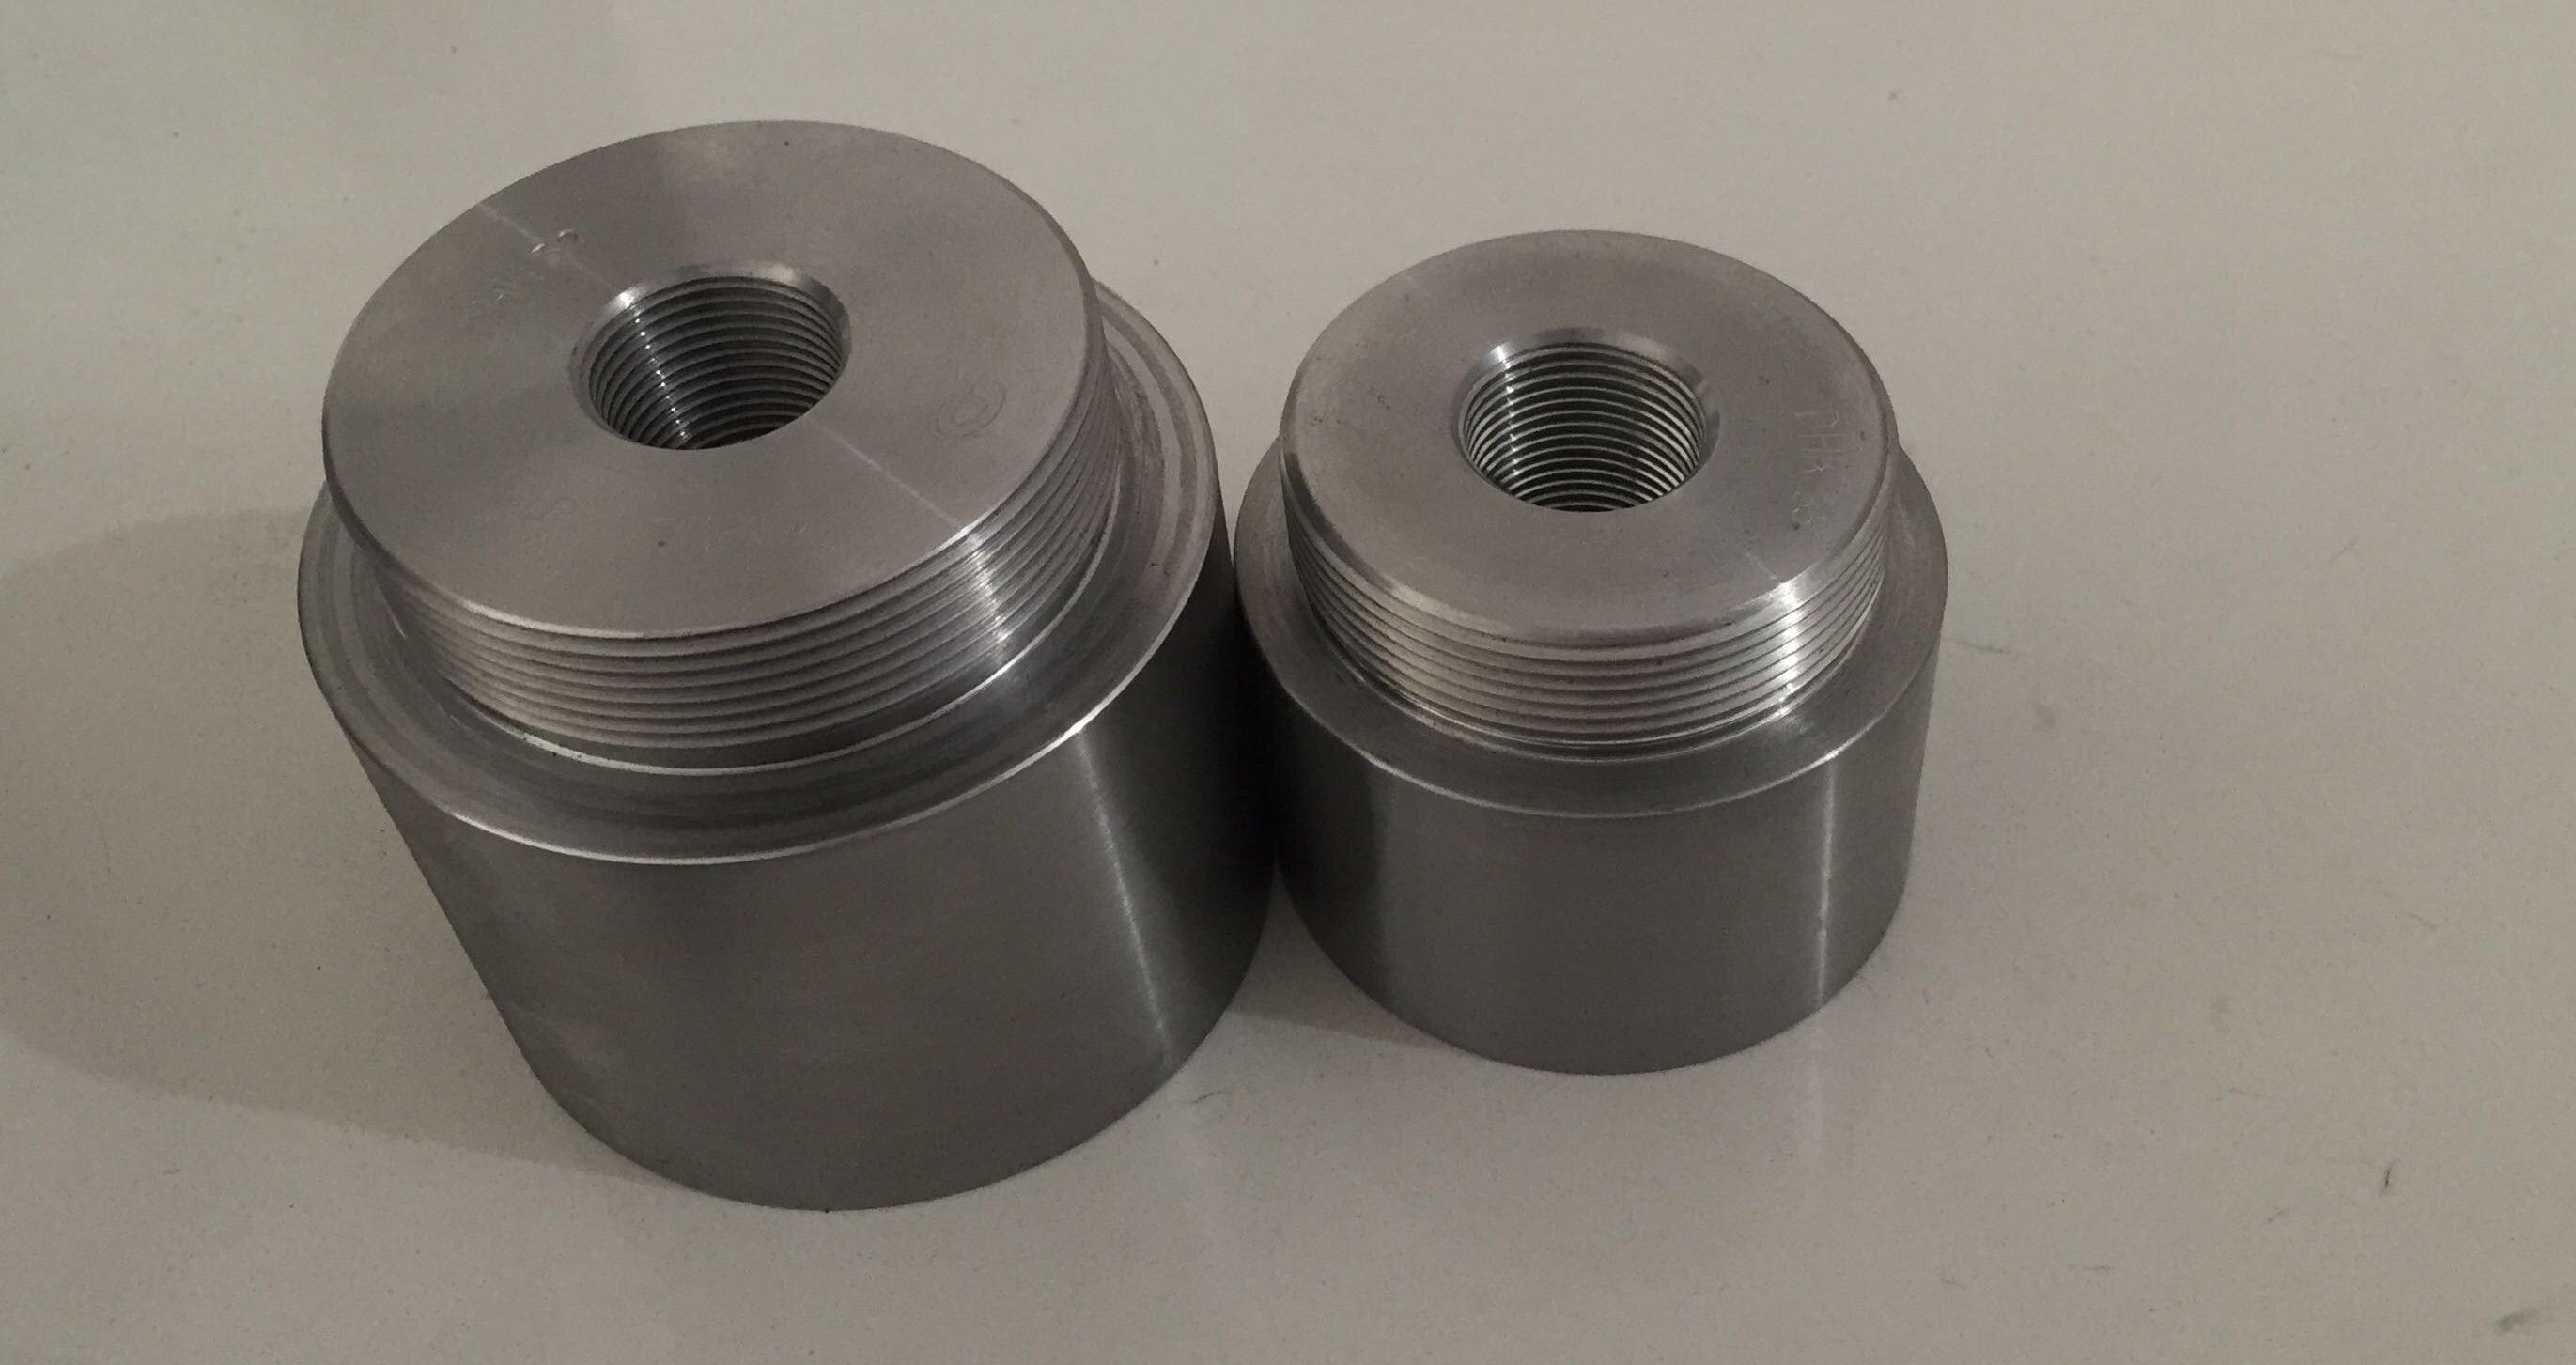 Couplings and threaded fittings